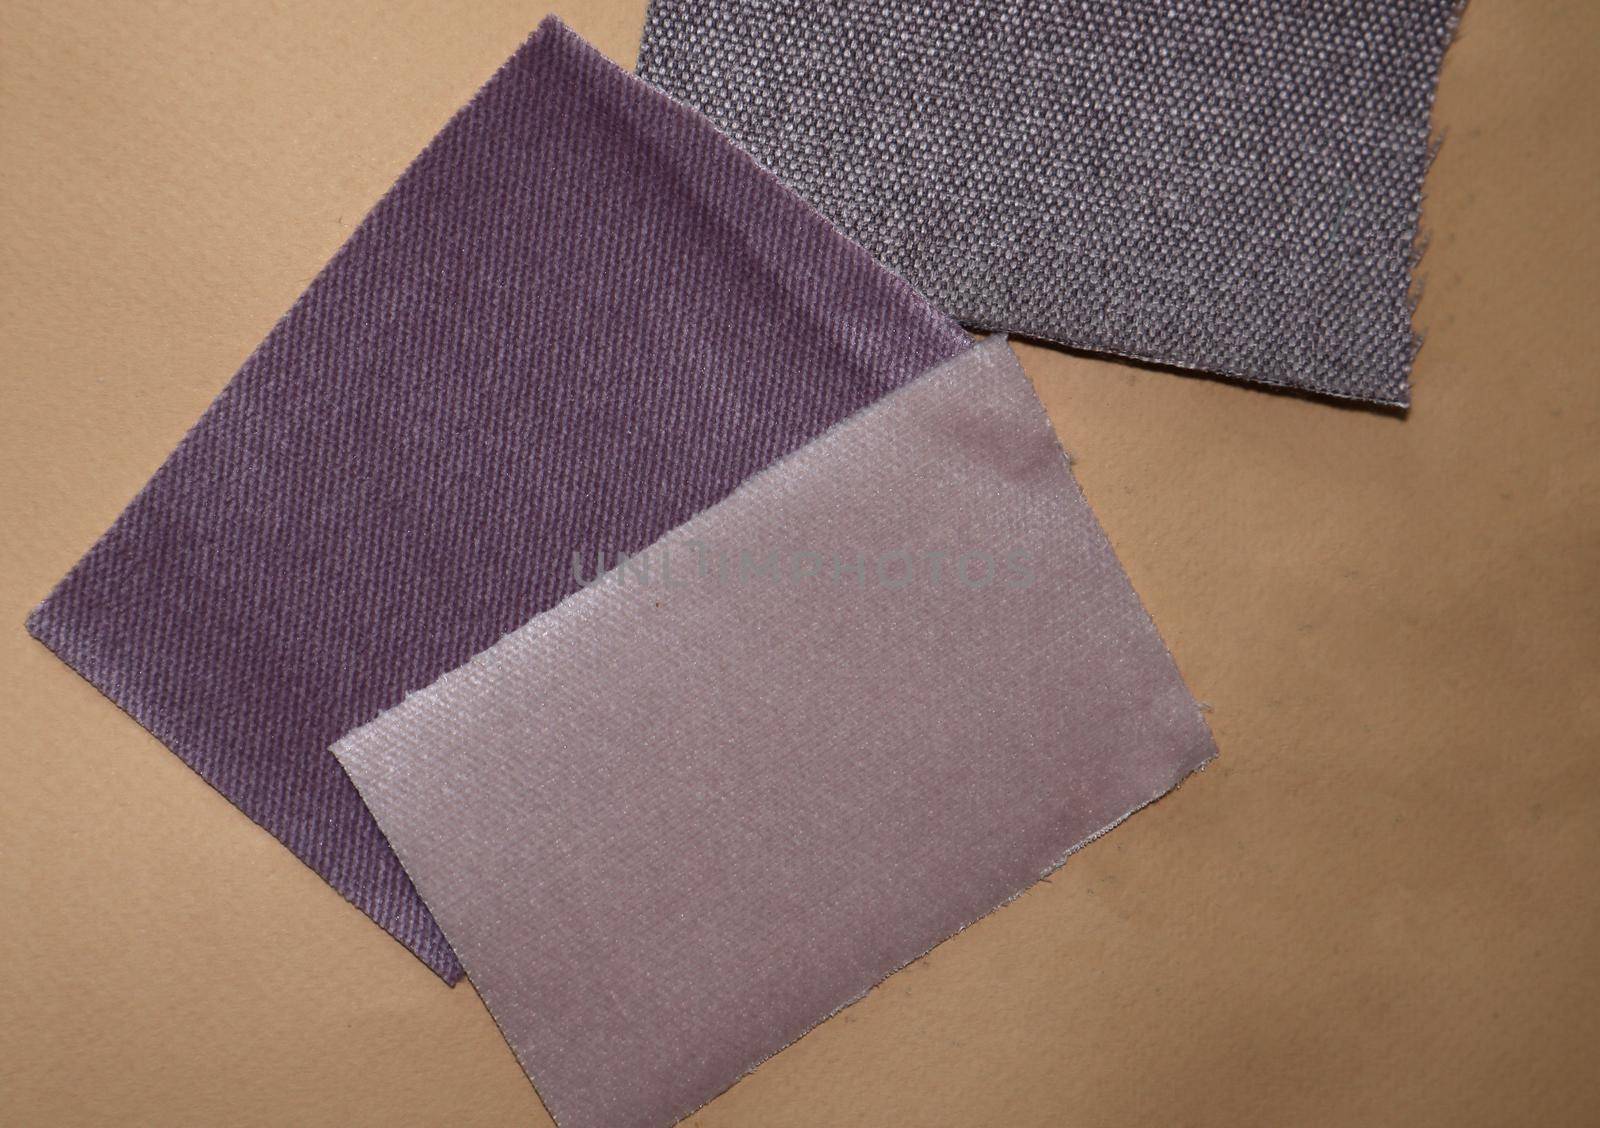 Fabric samples on a light brown background by SemFid